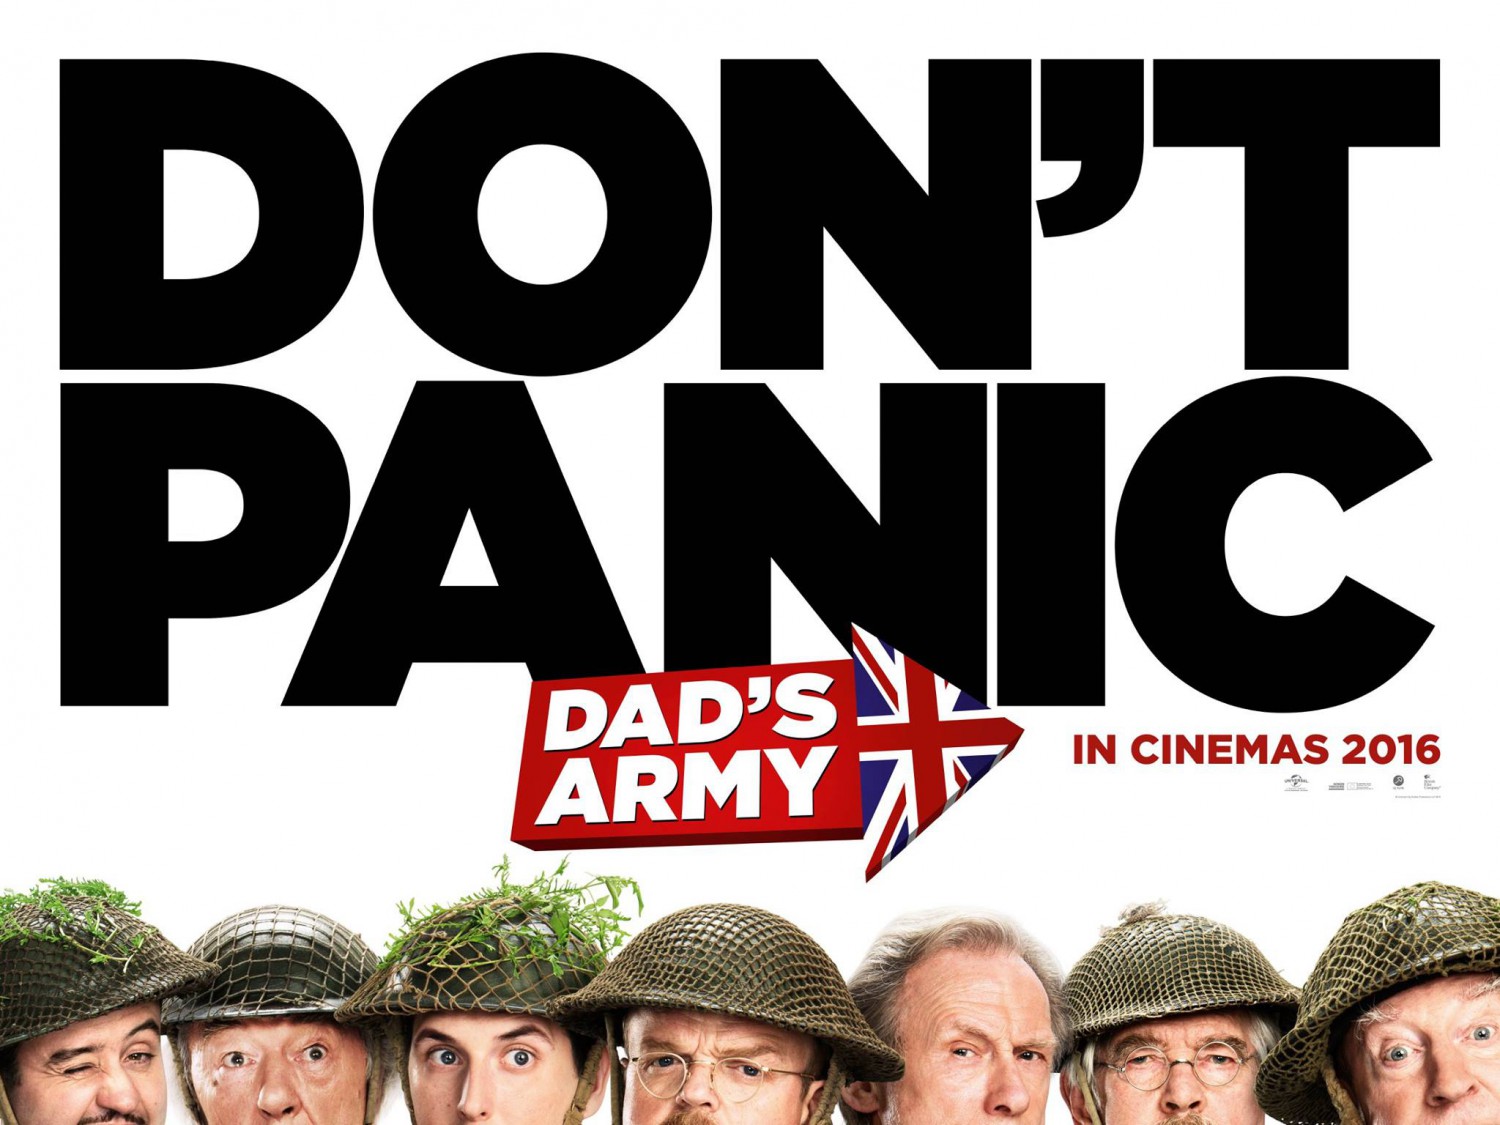 dads_army_xlg